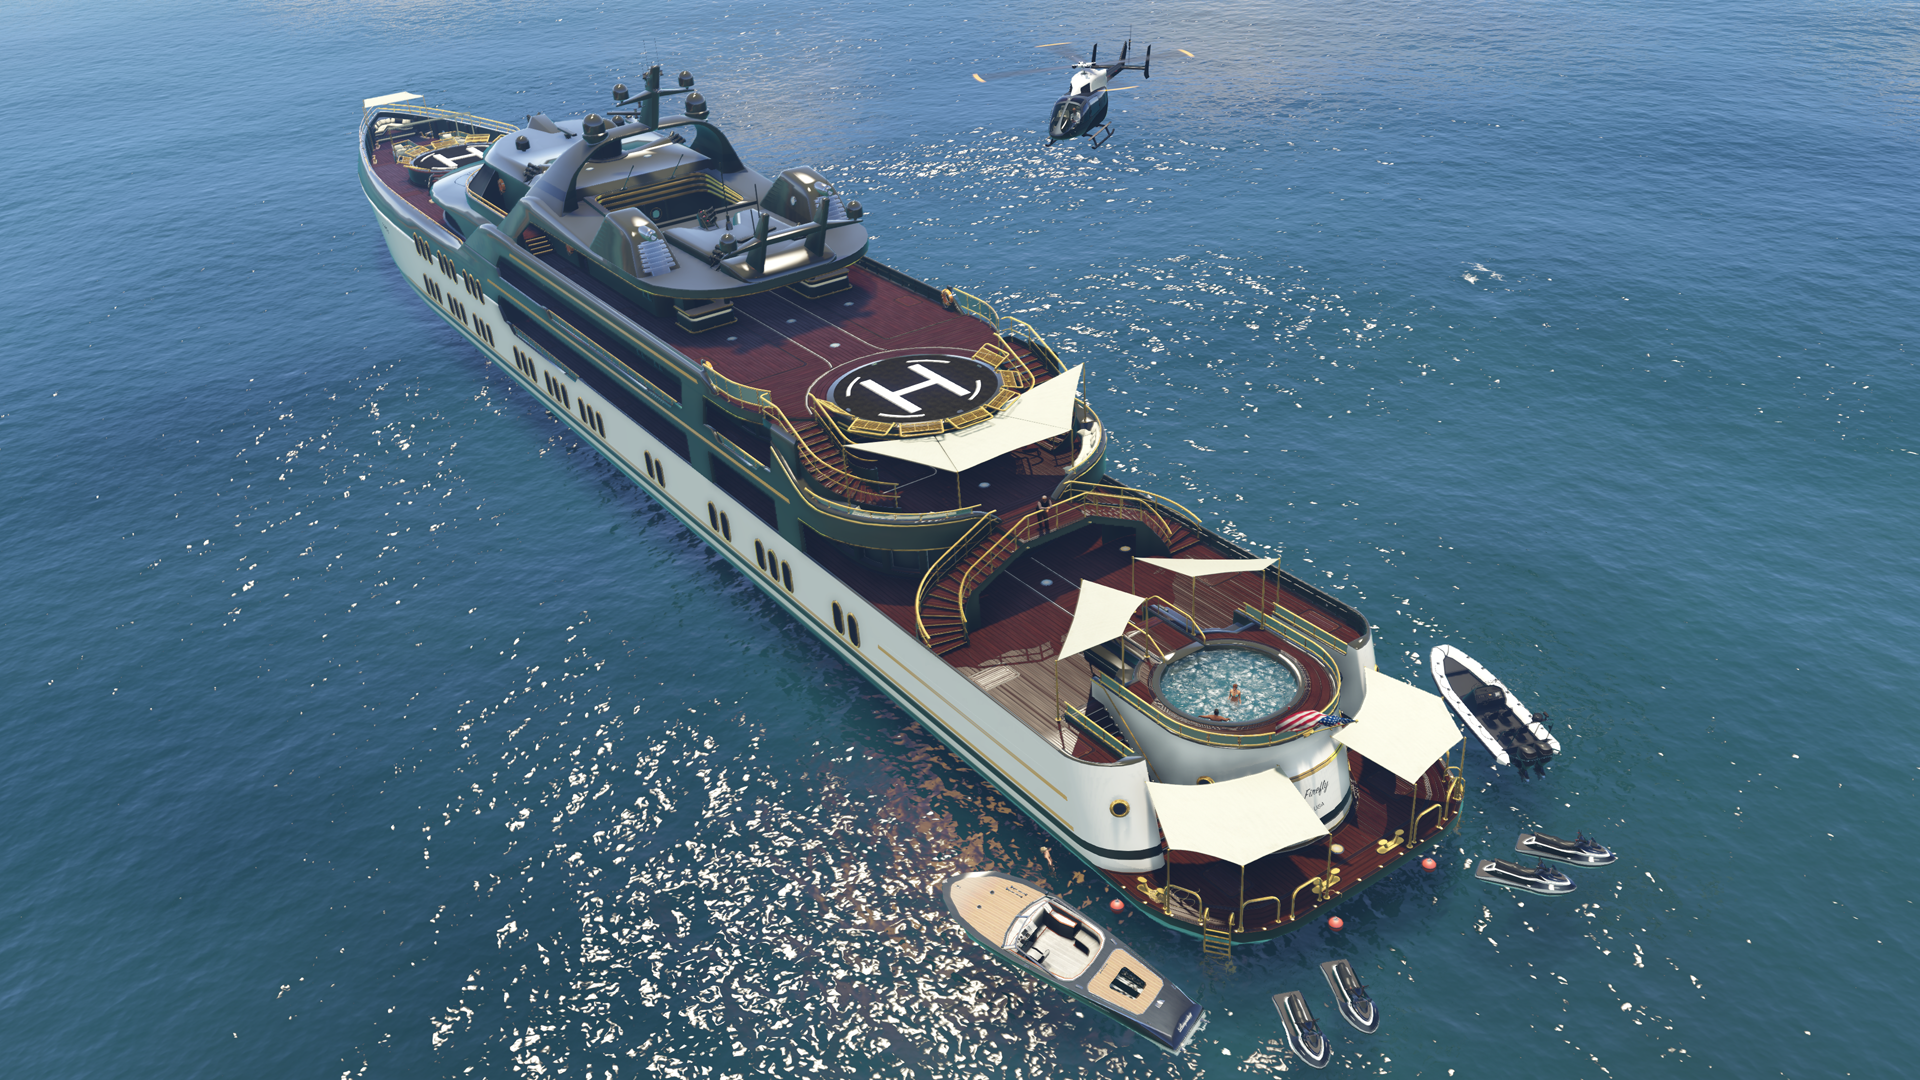 GTA Online Bonuses: Double GTA$ and RP in Resurrection, Discounts on Yachts  and More - Rockstar Games